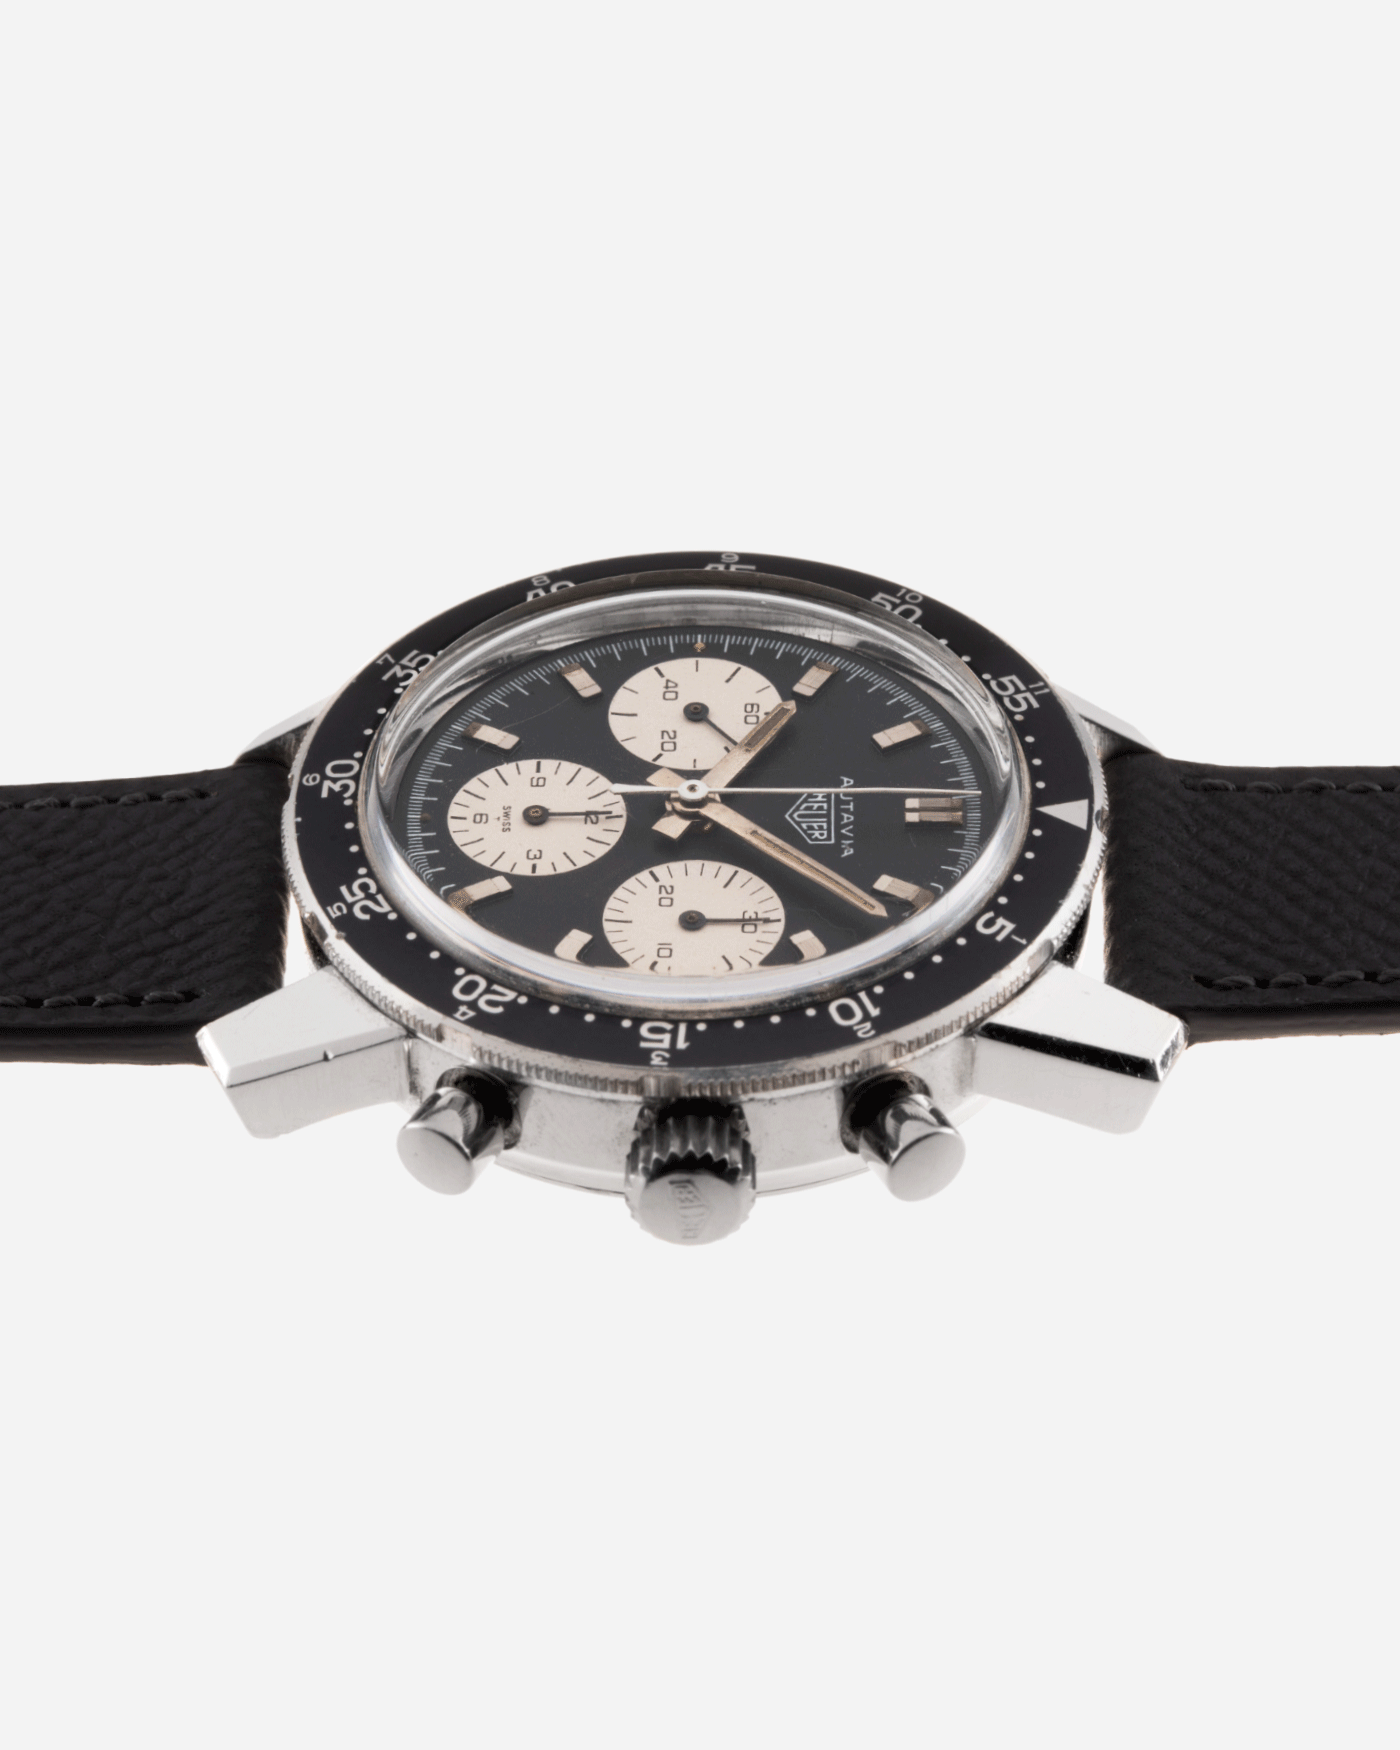 Brand: Heuer Year: 1960’s Model: Autavia Reference Number: 2446C MH (Compressor Case, Minute Hour Bezel) Serial Number: 110XXX Material: Stainless Steel Movement: Valjoux 72 Case Diameter: 40mm Lug Width: 20mm Bracelet/Strap: Molequin Anthracite Grey Textured Calf and Stainless Steel Buckle